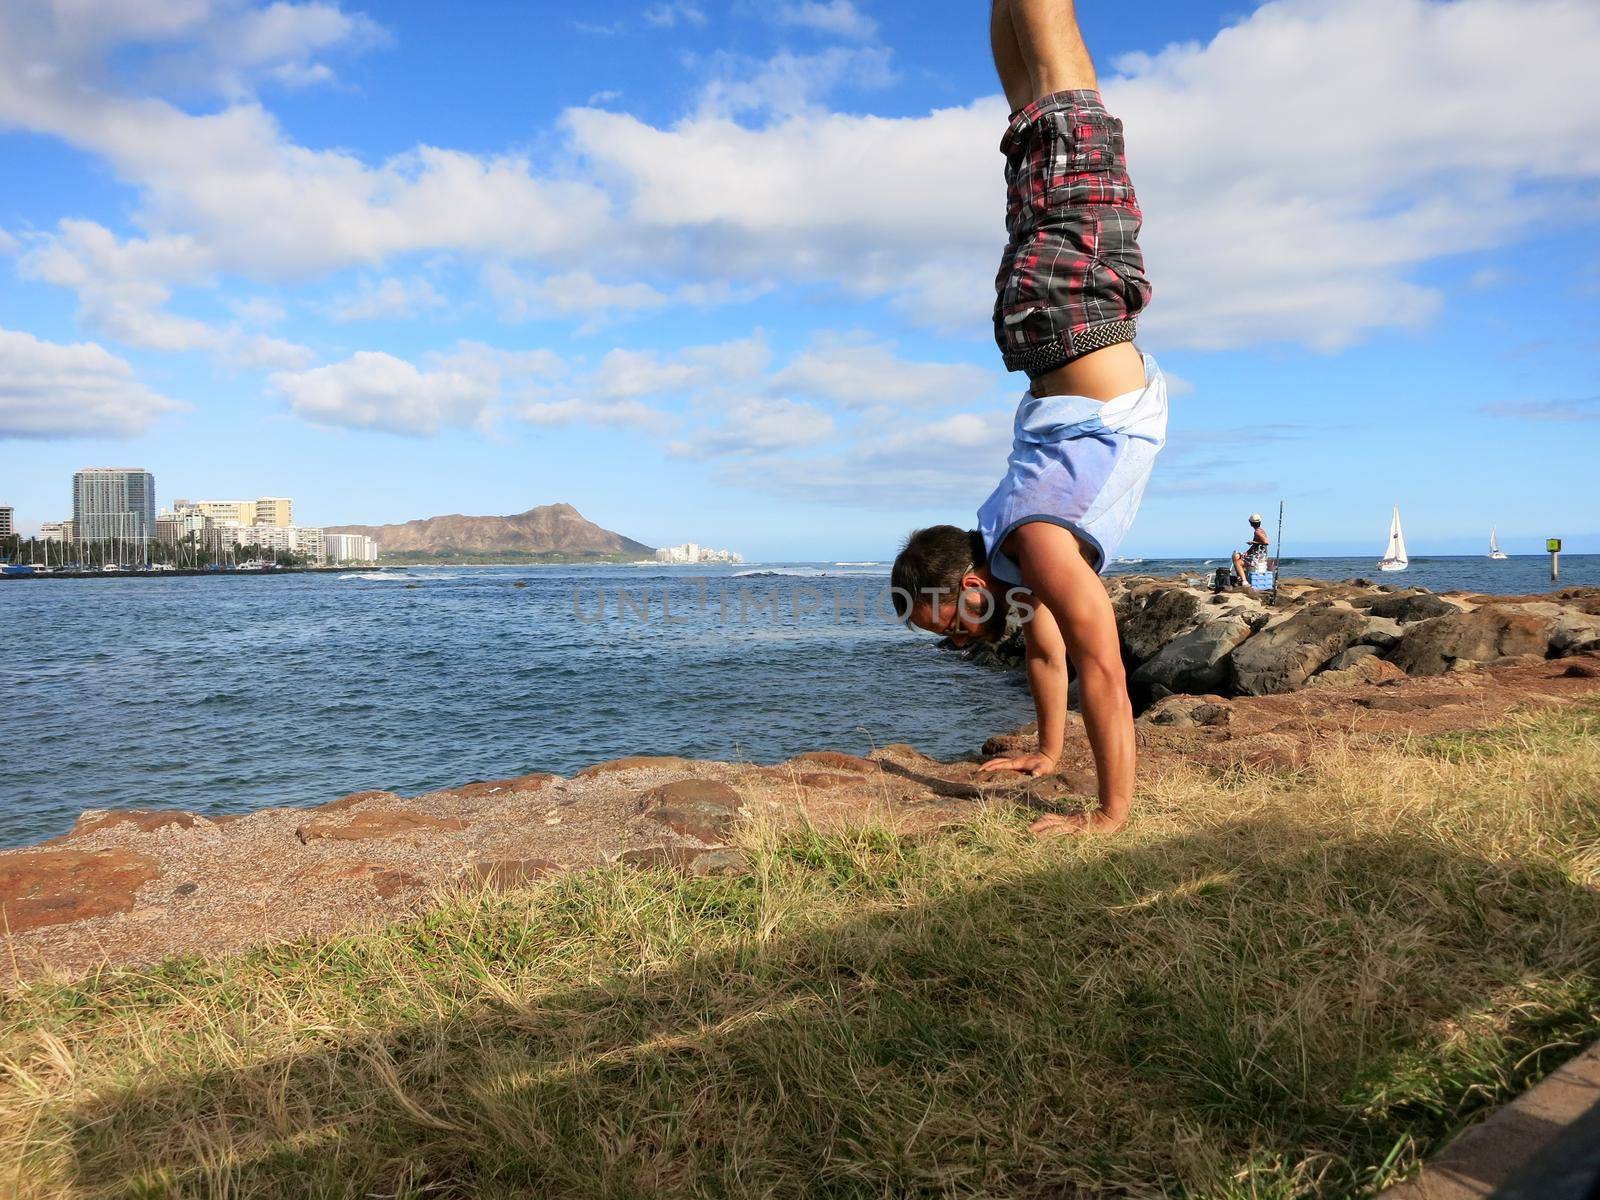 Man wearing shorts, shirt, and shoes Handstanding along shore of Magic Island with Ala Wai Boat Harbor, Waikiki, Diamond Head in the distance looking into the pacific ocean on Oahu, Hawaii on a beautiful day. 
